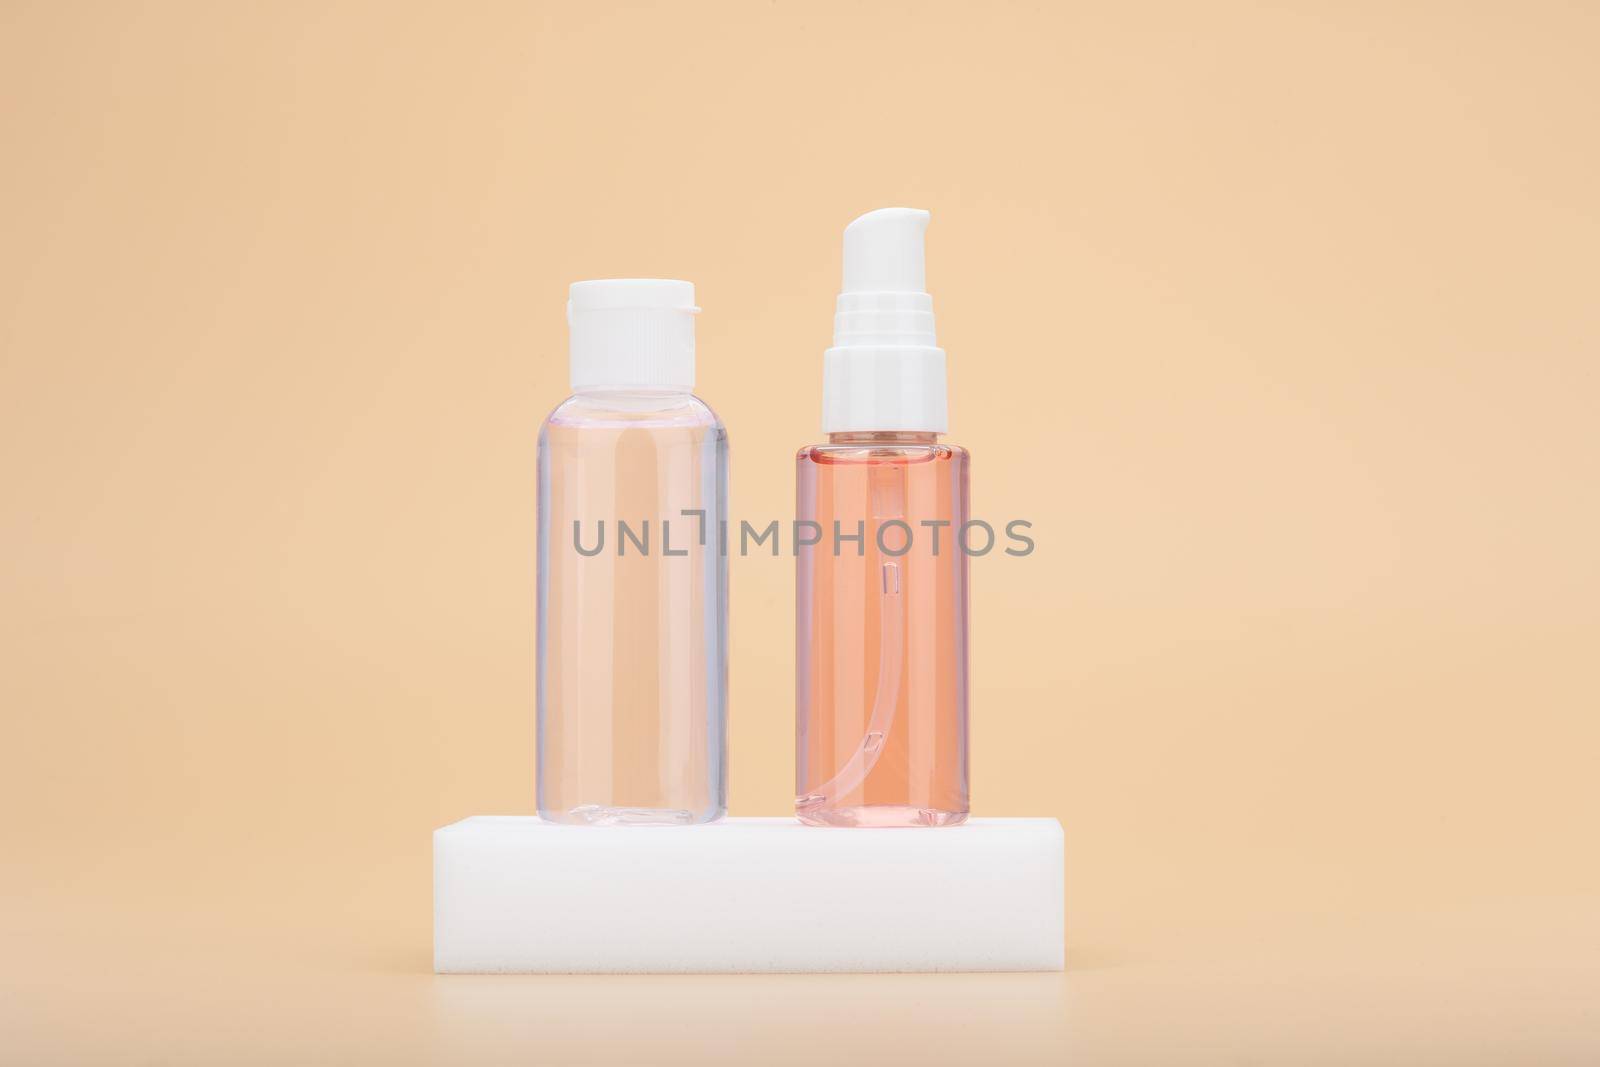 Skin hydrating lotion and cleansing foam or gel on white podium against beige background. Beauty products for skin treatment at home. Concept of clean and smooth skin